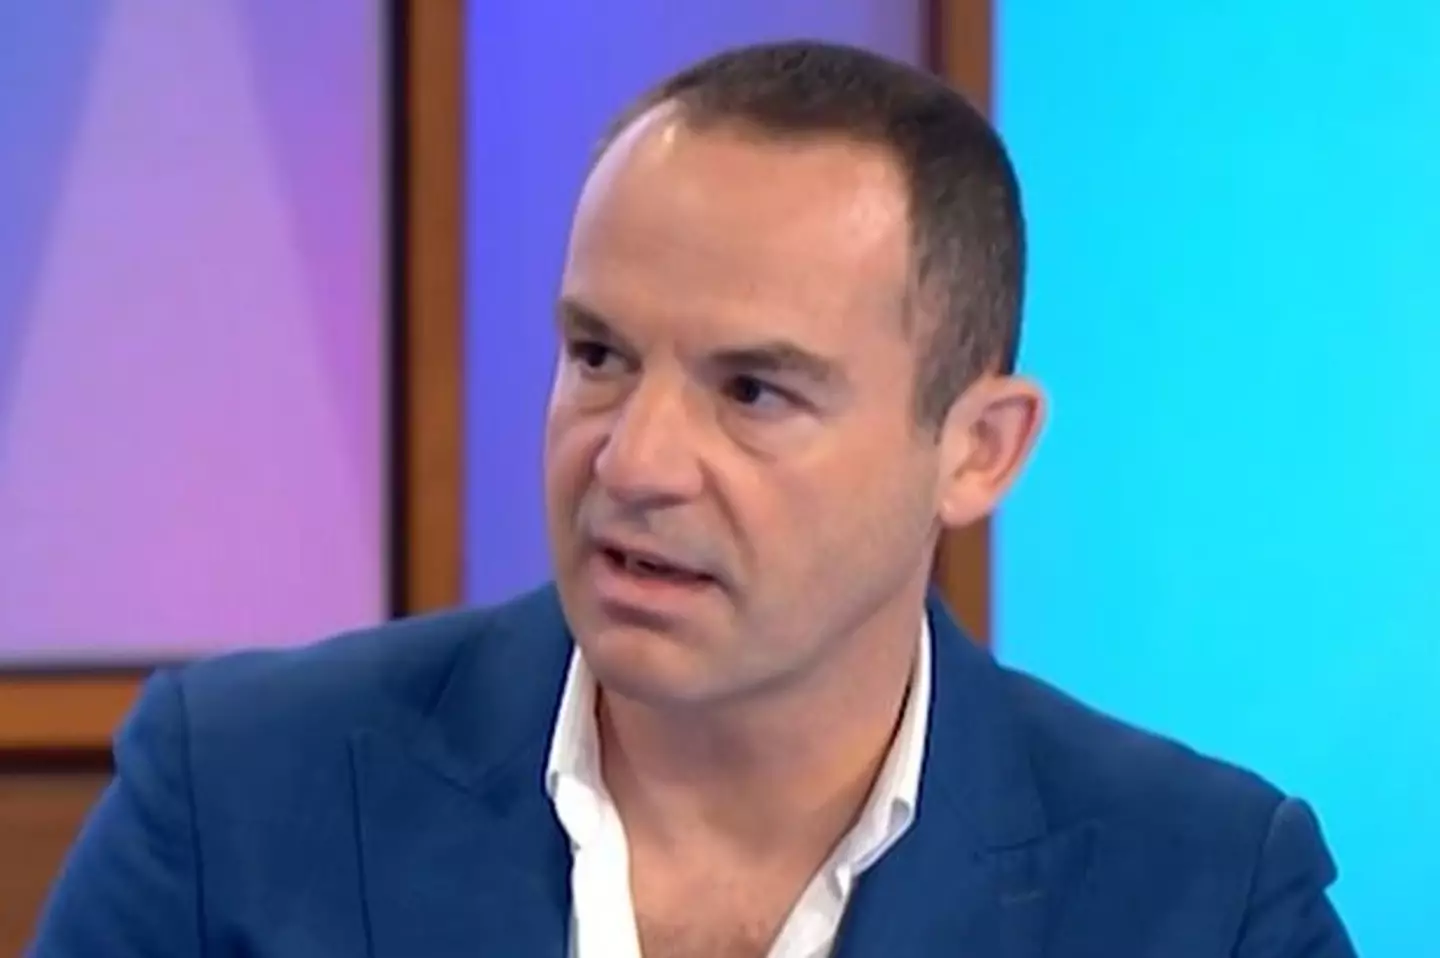 Martin Lewis has explained how the new energy price cap freeze will affect people.